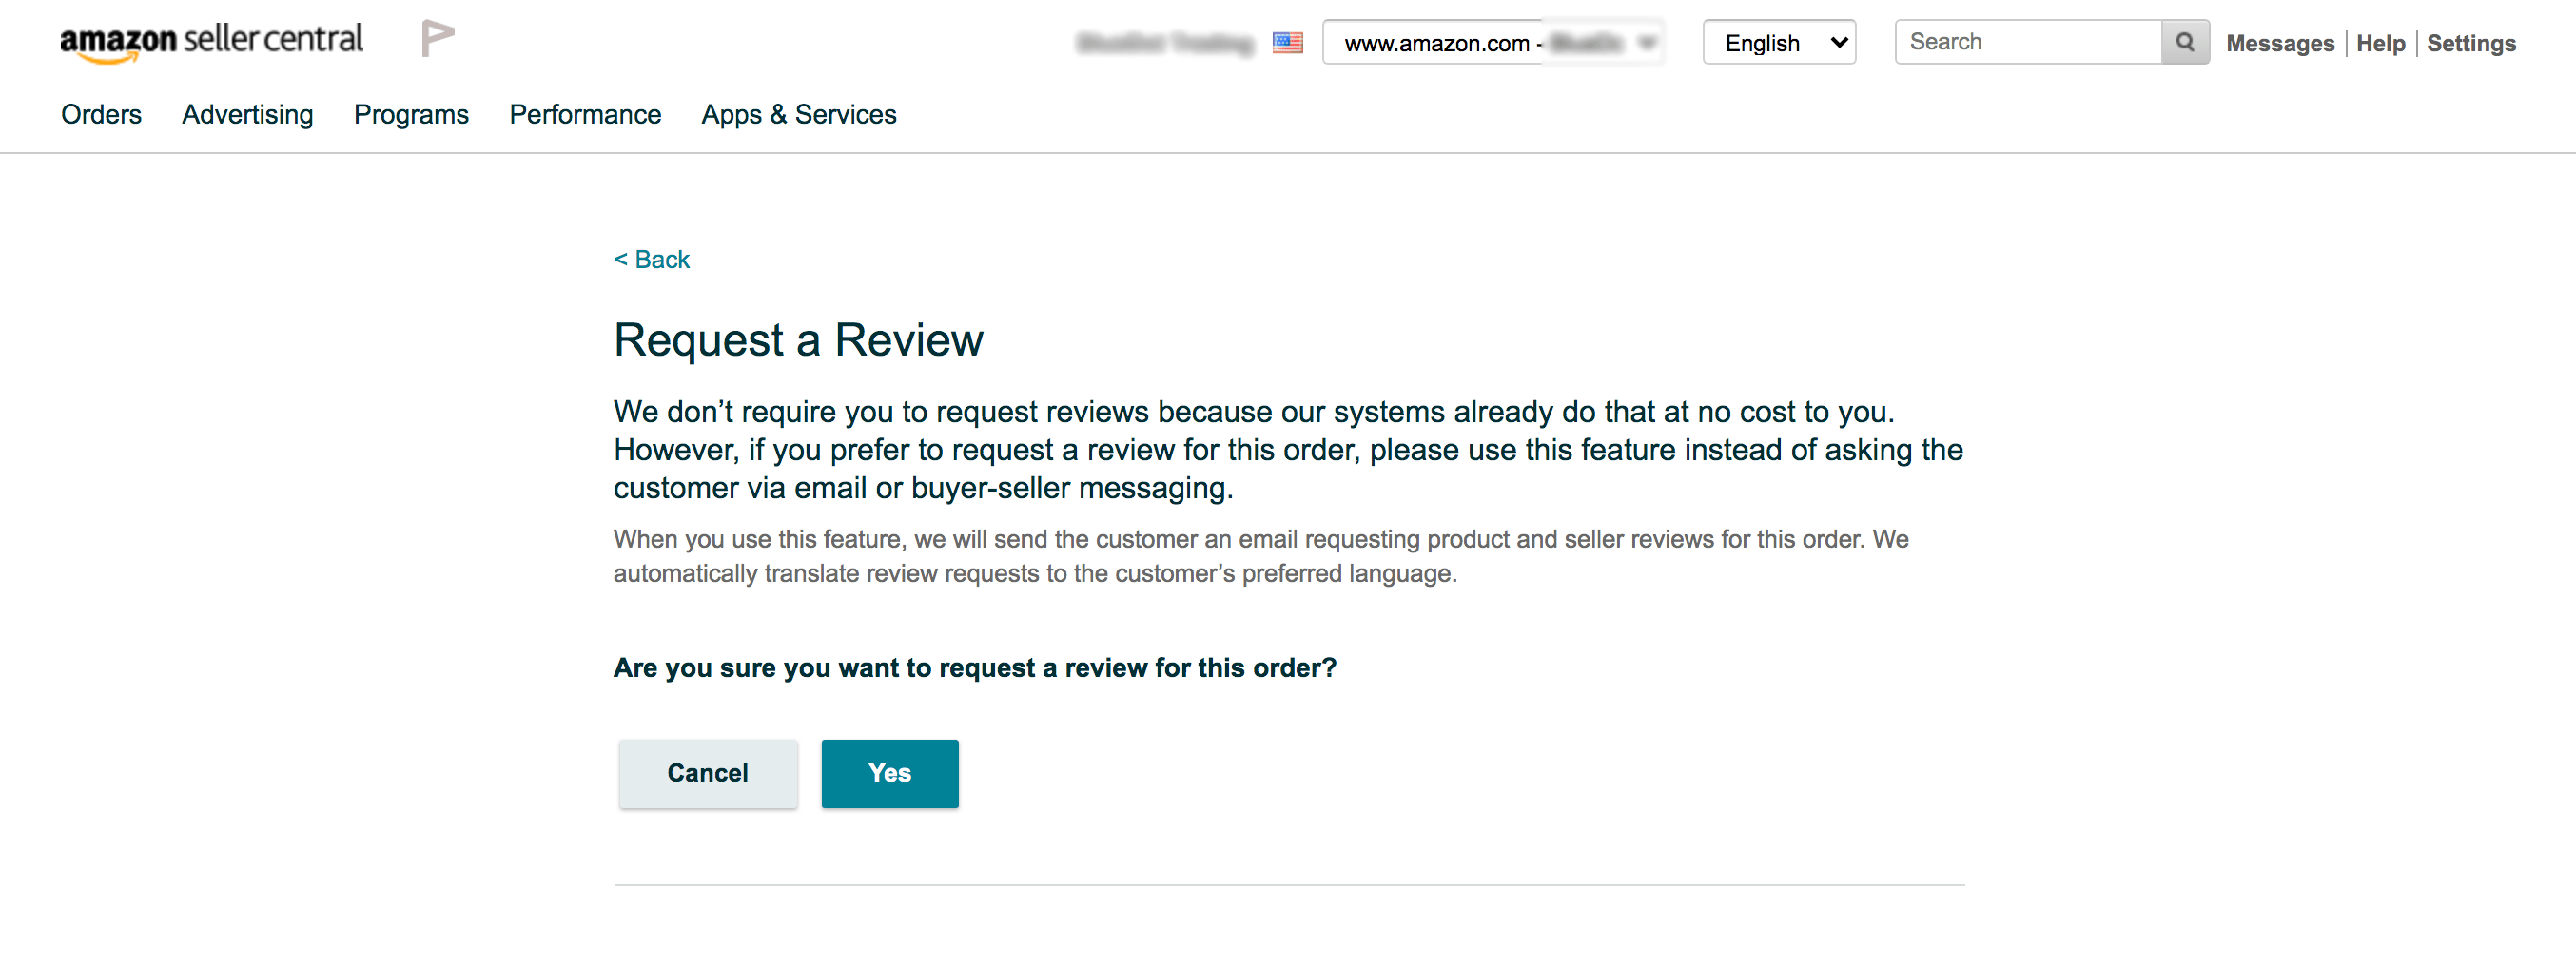 amazon-rr-4-request-review.png